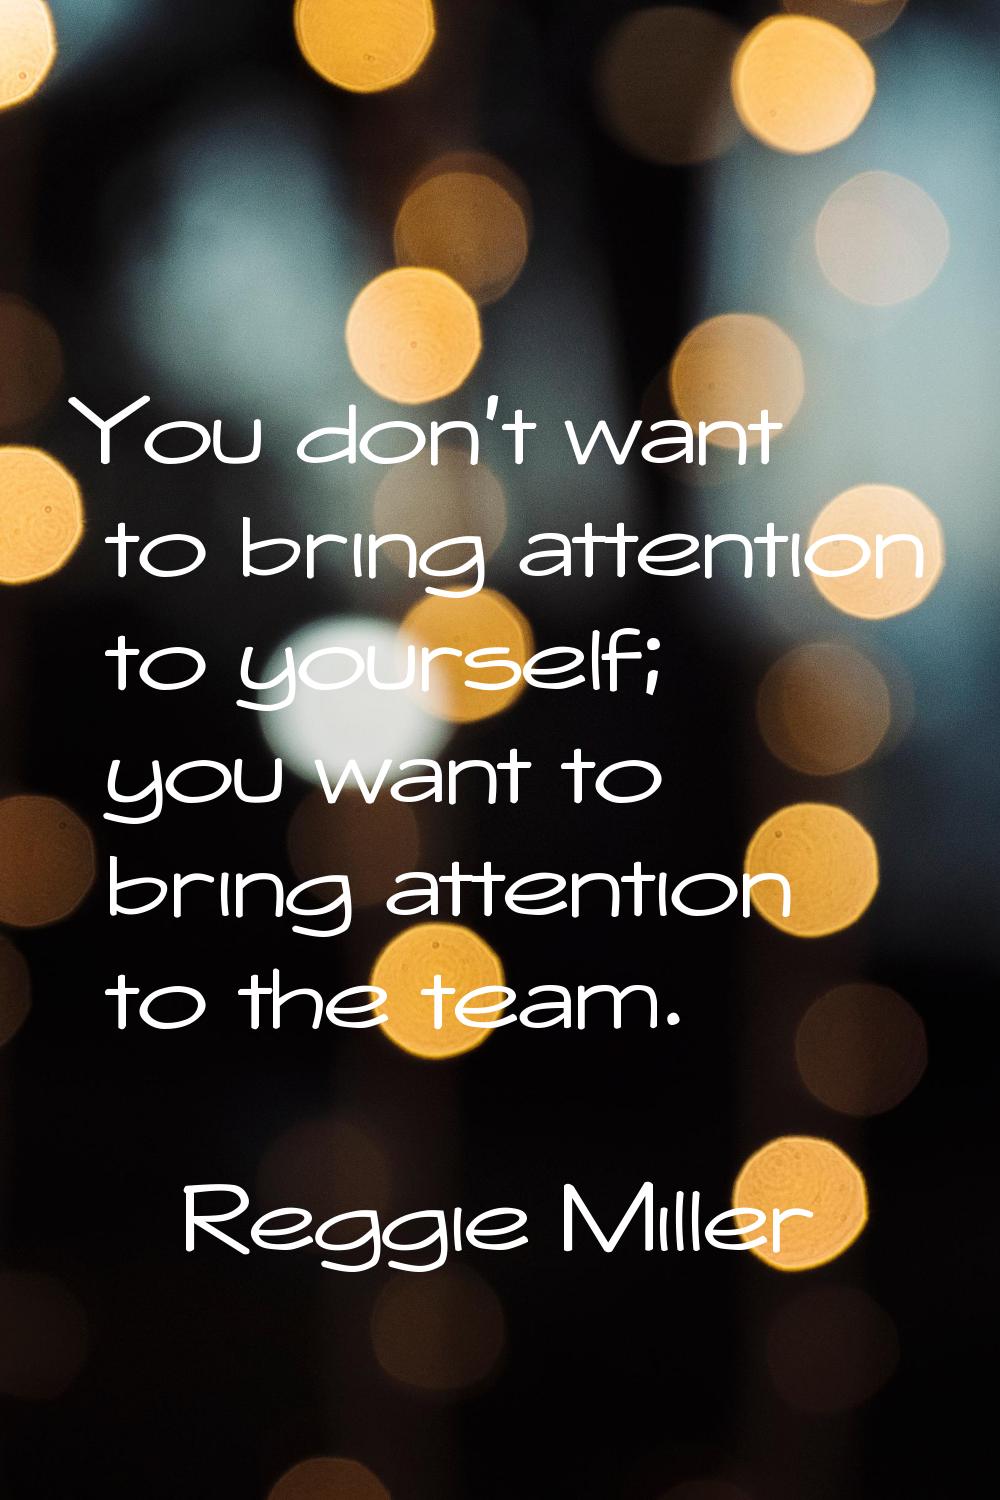 You don't want to bring attention to yourself; you want to bring attention to the team.